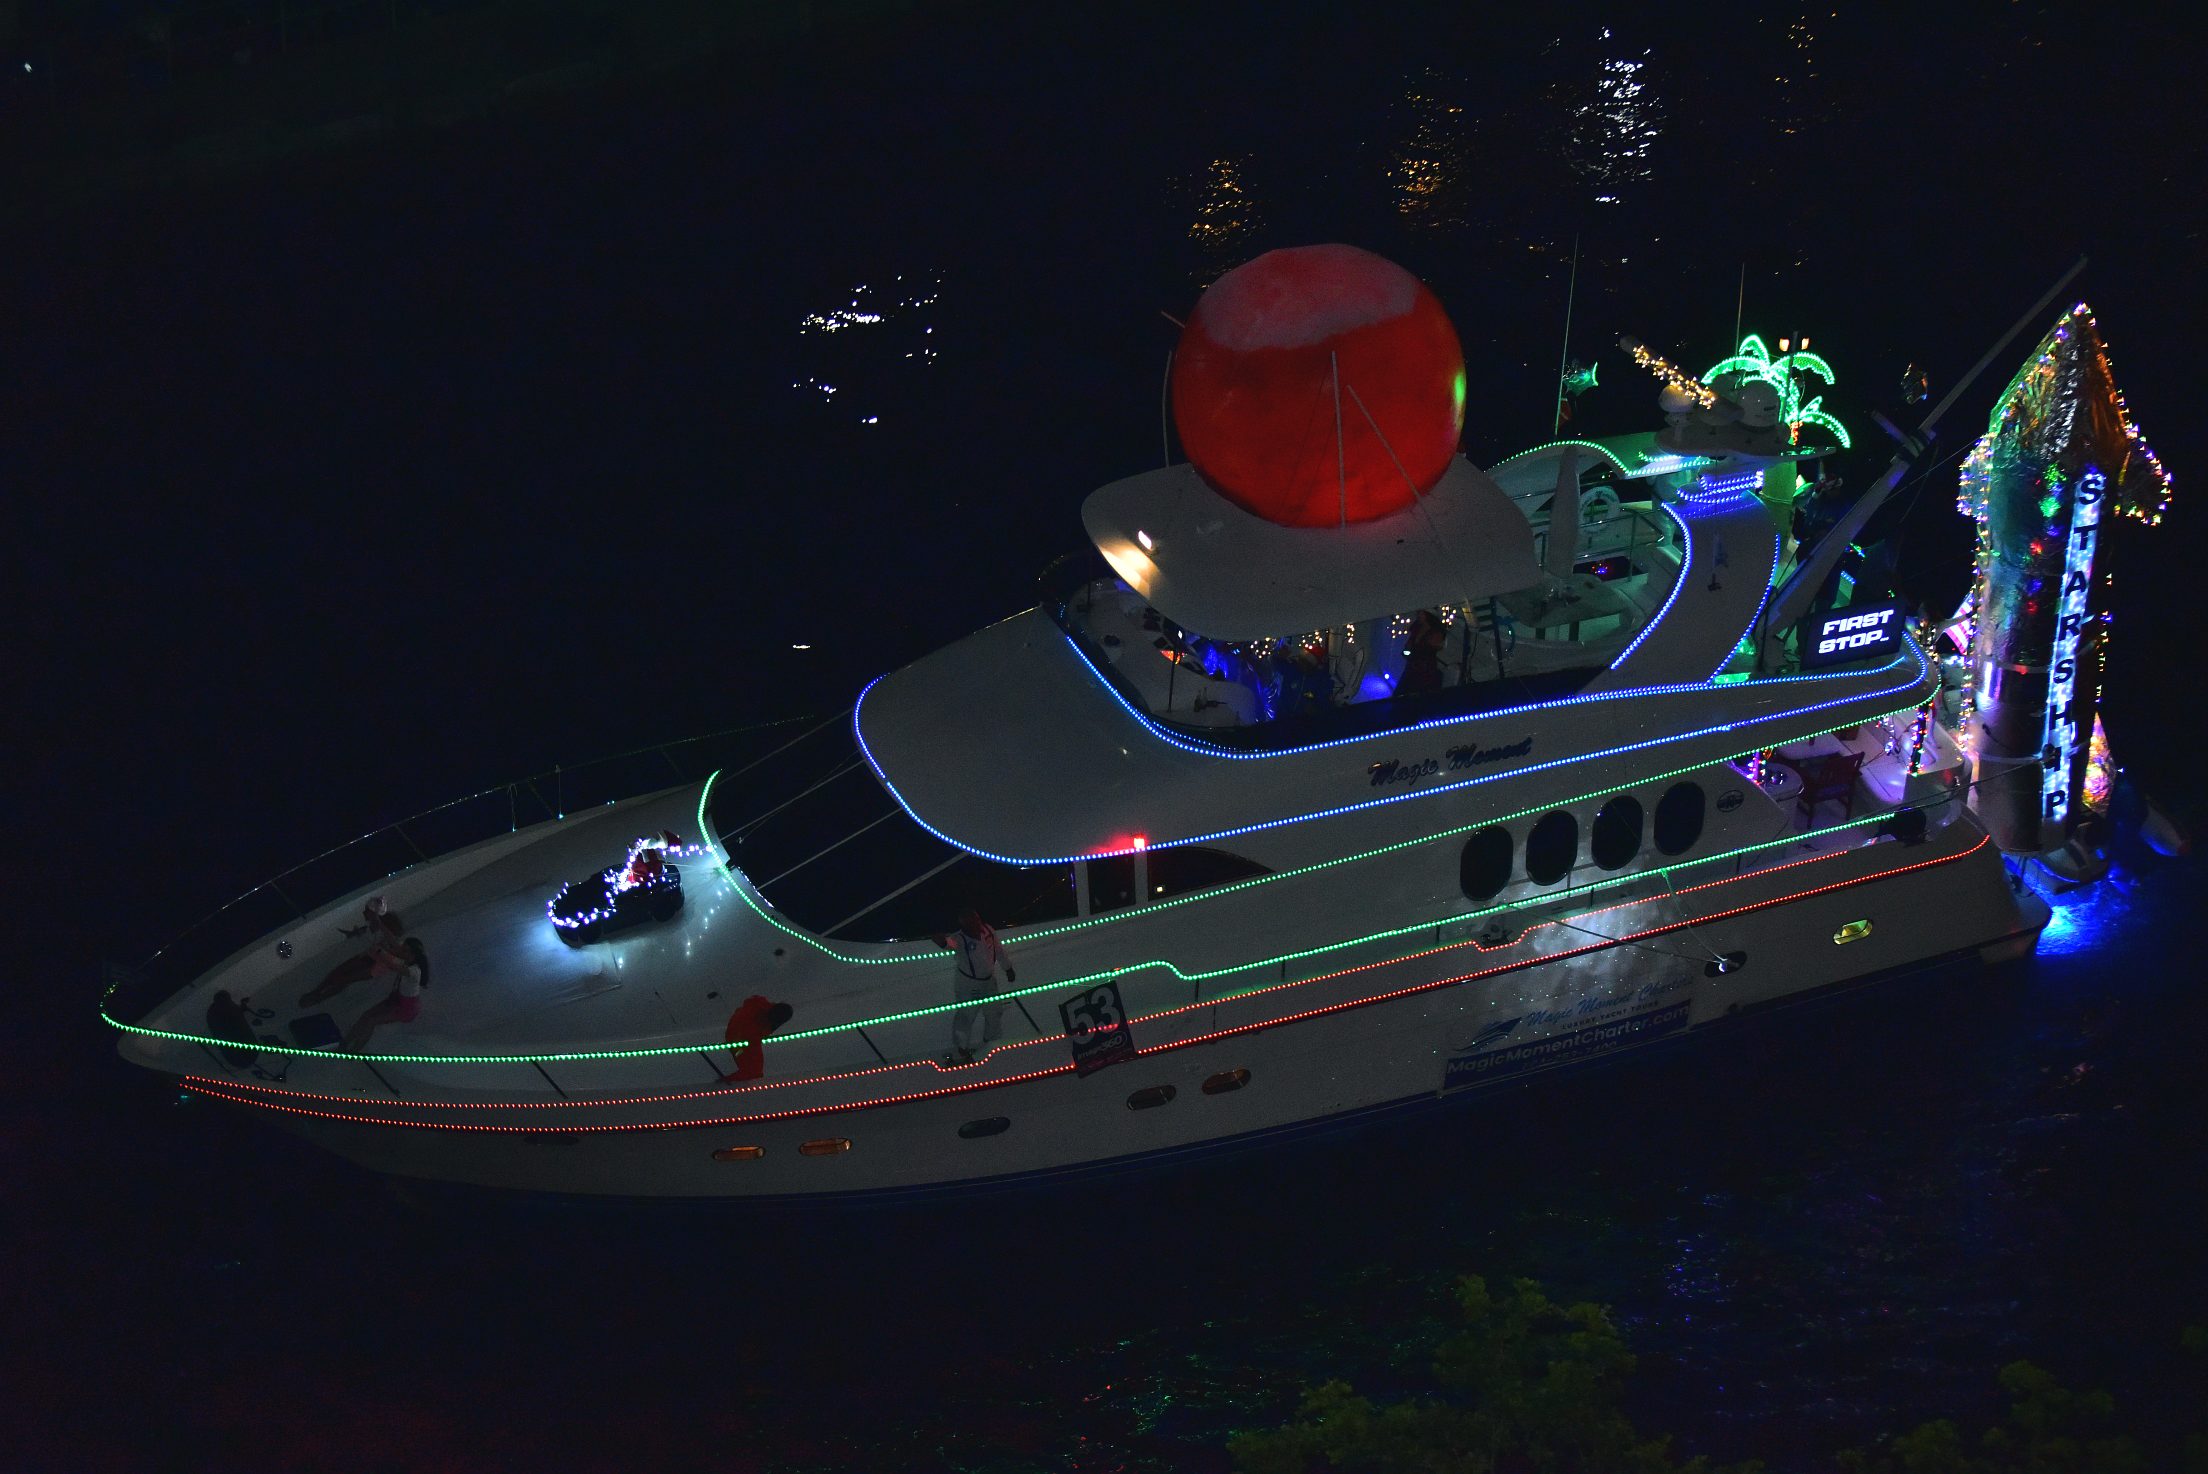 Magic Moment, boat number 53 in the 2021 Winterfest Boat Parade